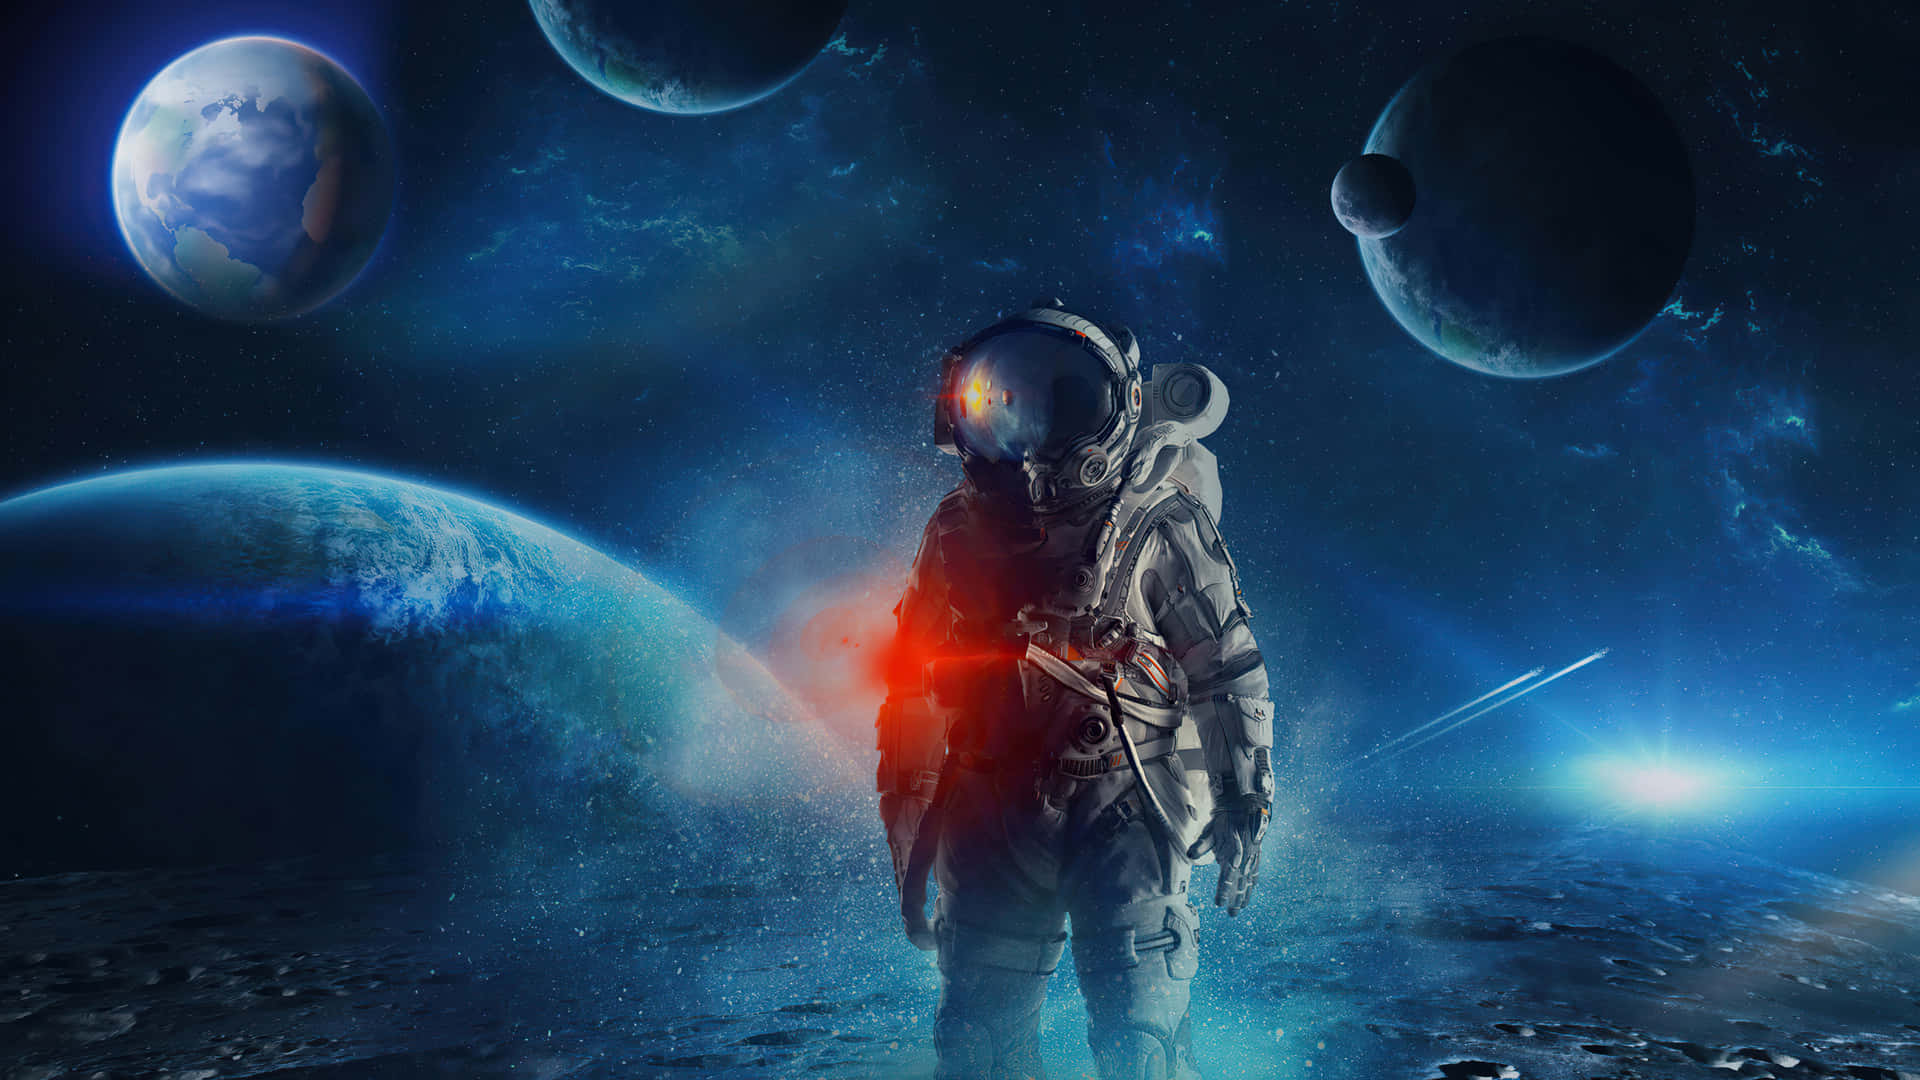 Image  An astronaut marvels at the beauty of their journey into space Wallpaper